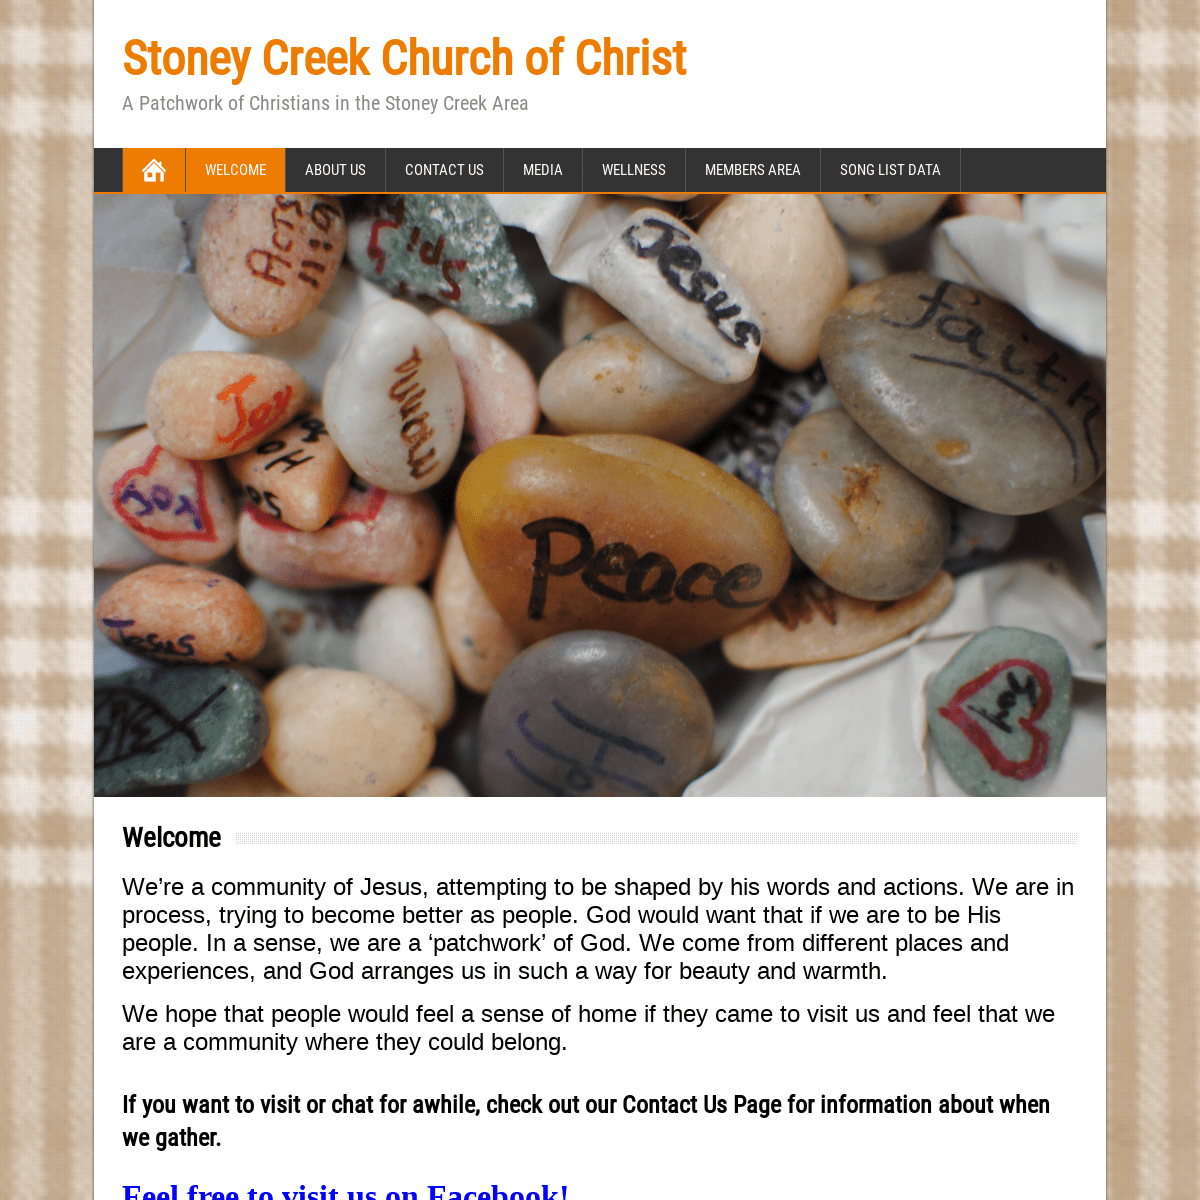 Stoney Creek Church of Christ – A Patchwork of Christians in the Stoney Creek Area